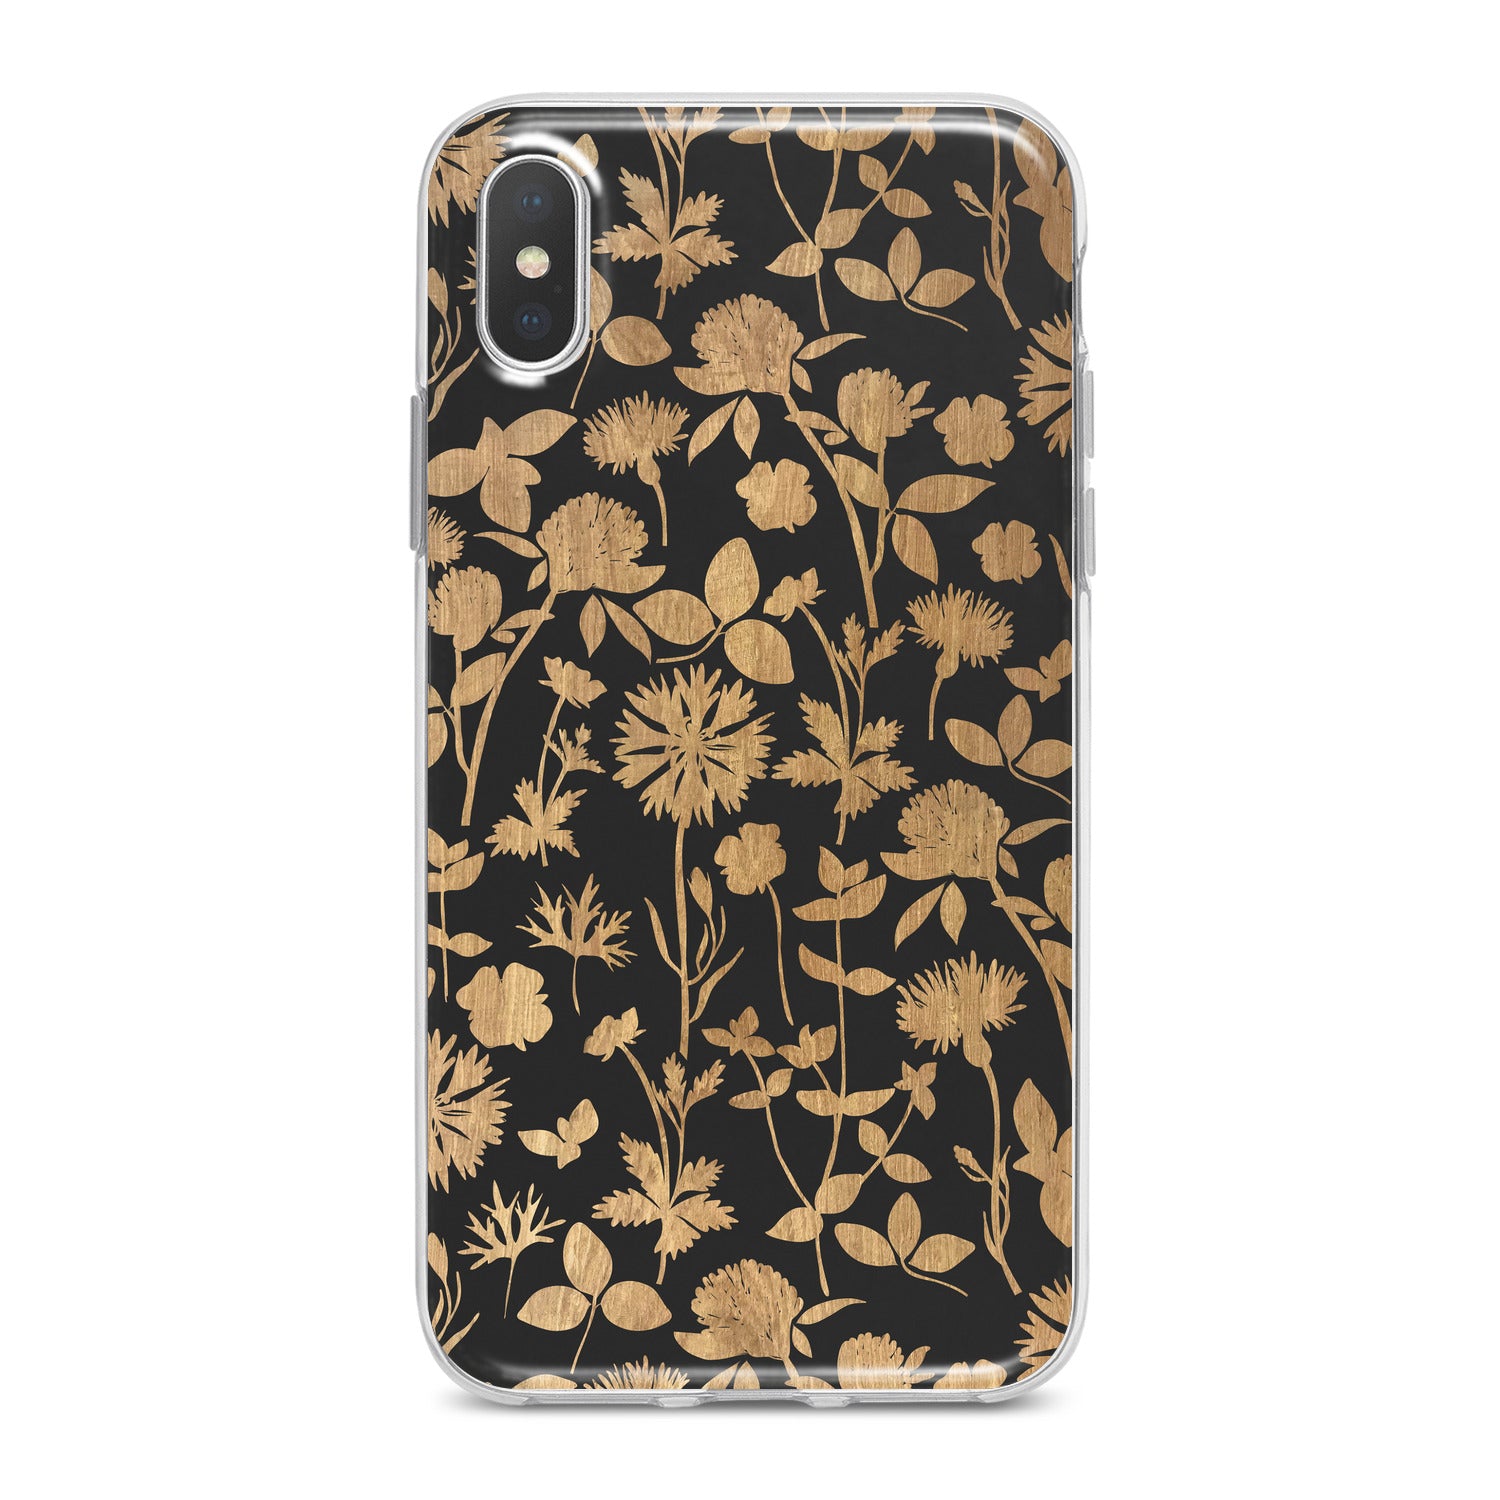 Lex Altern Cute Plants Theme Phone Case for your iPhone & Android phone.